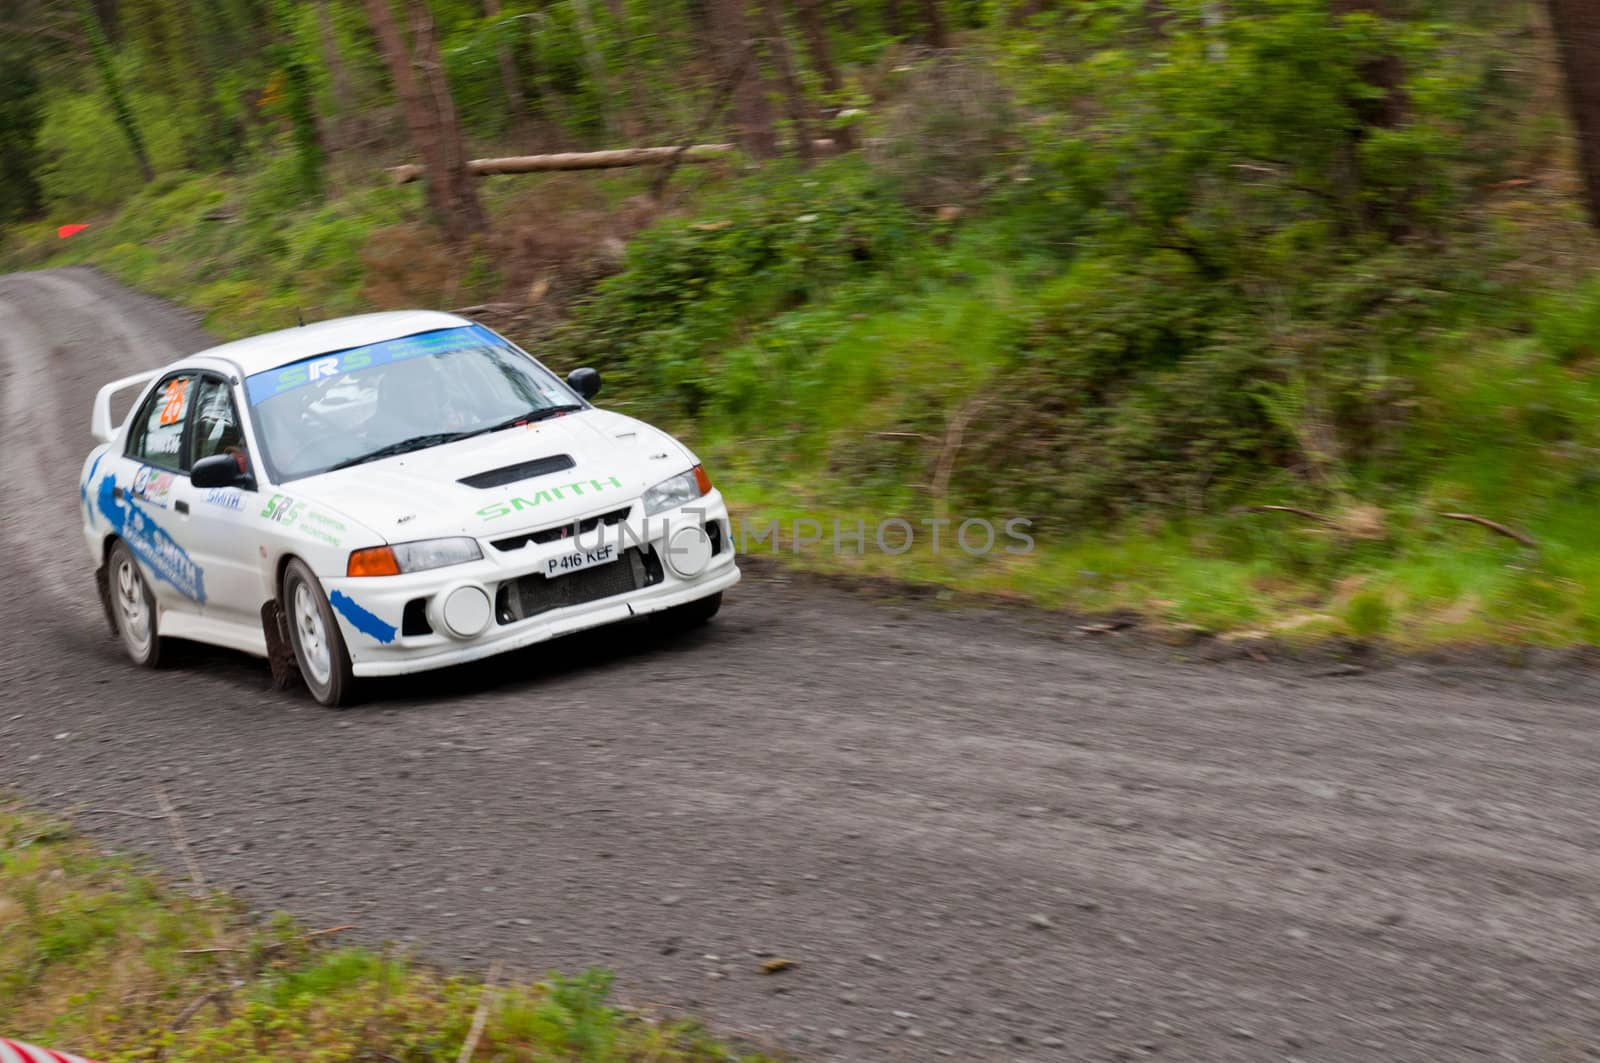 D. Smith driving Mitsubishi Evo by luissantos84